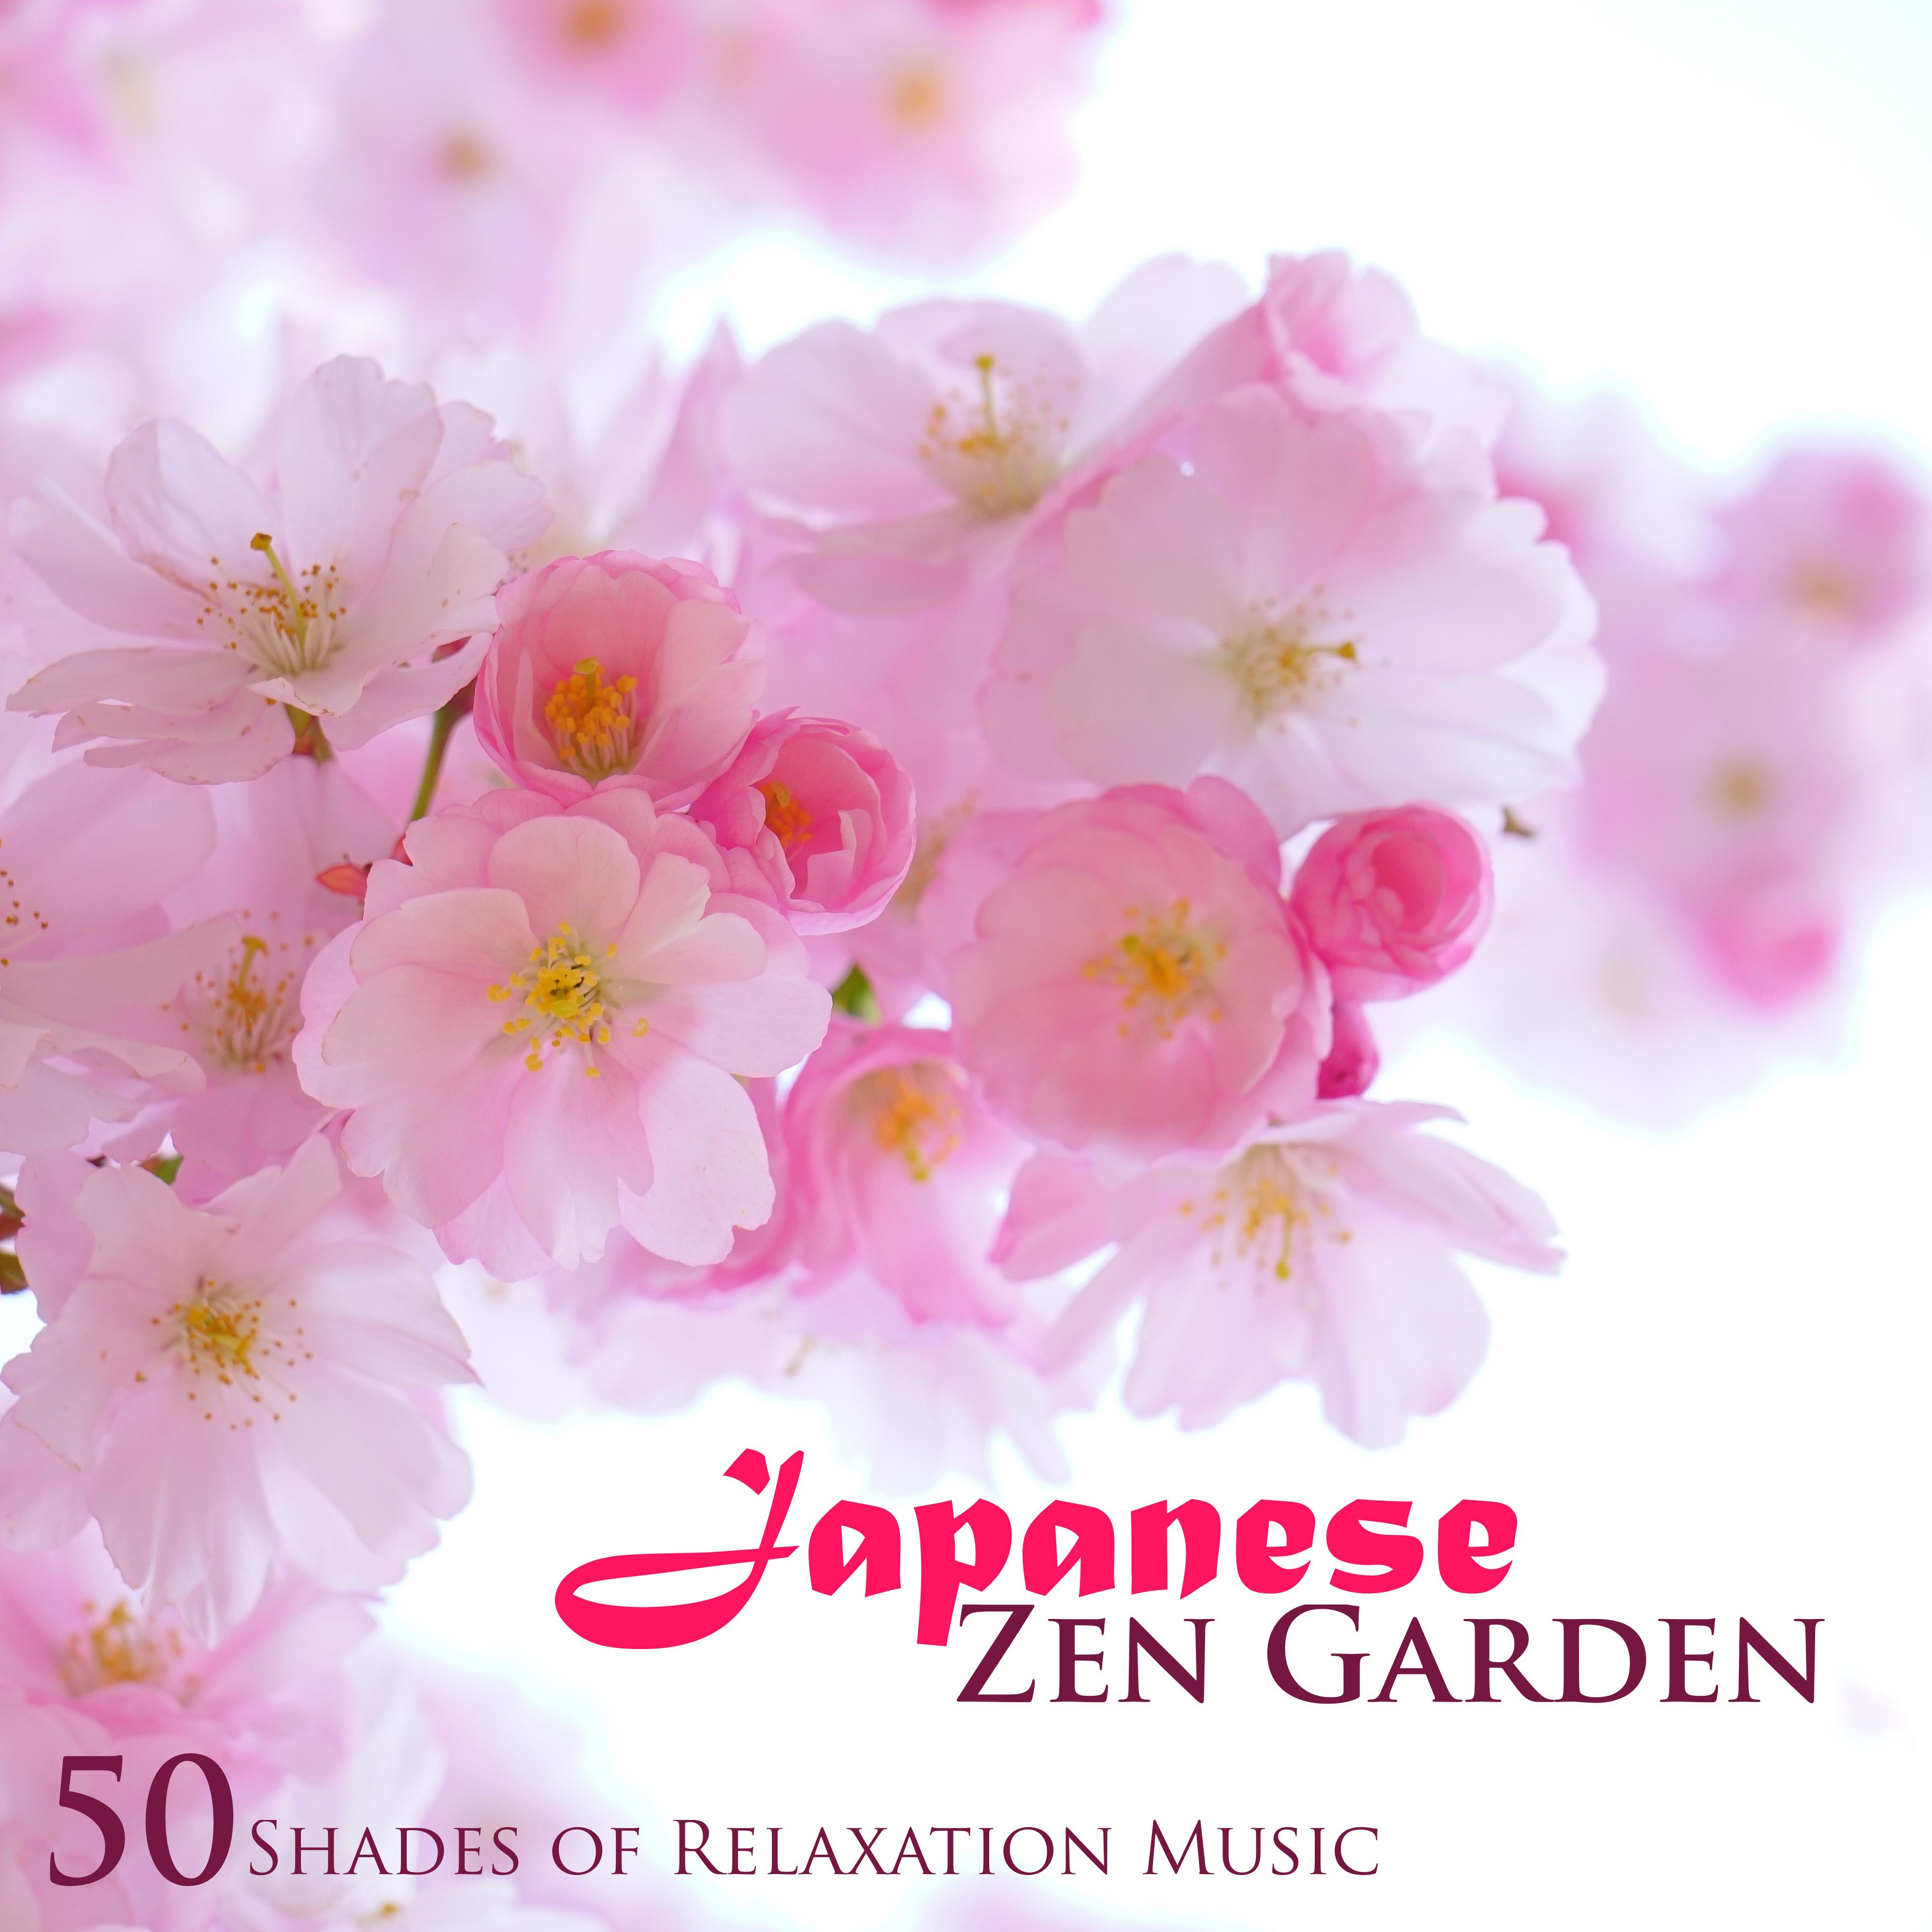 Japanese Zen Garden: 50 Shades of Relaxation Music, Meditation Songs with Soothing Nature Sounds, Spa, Music Therapy, Sleep